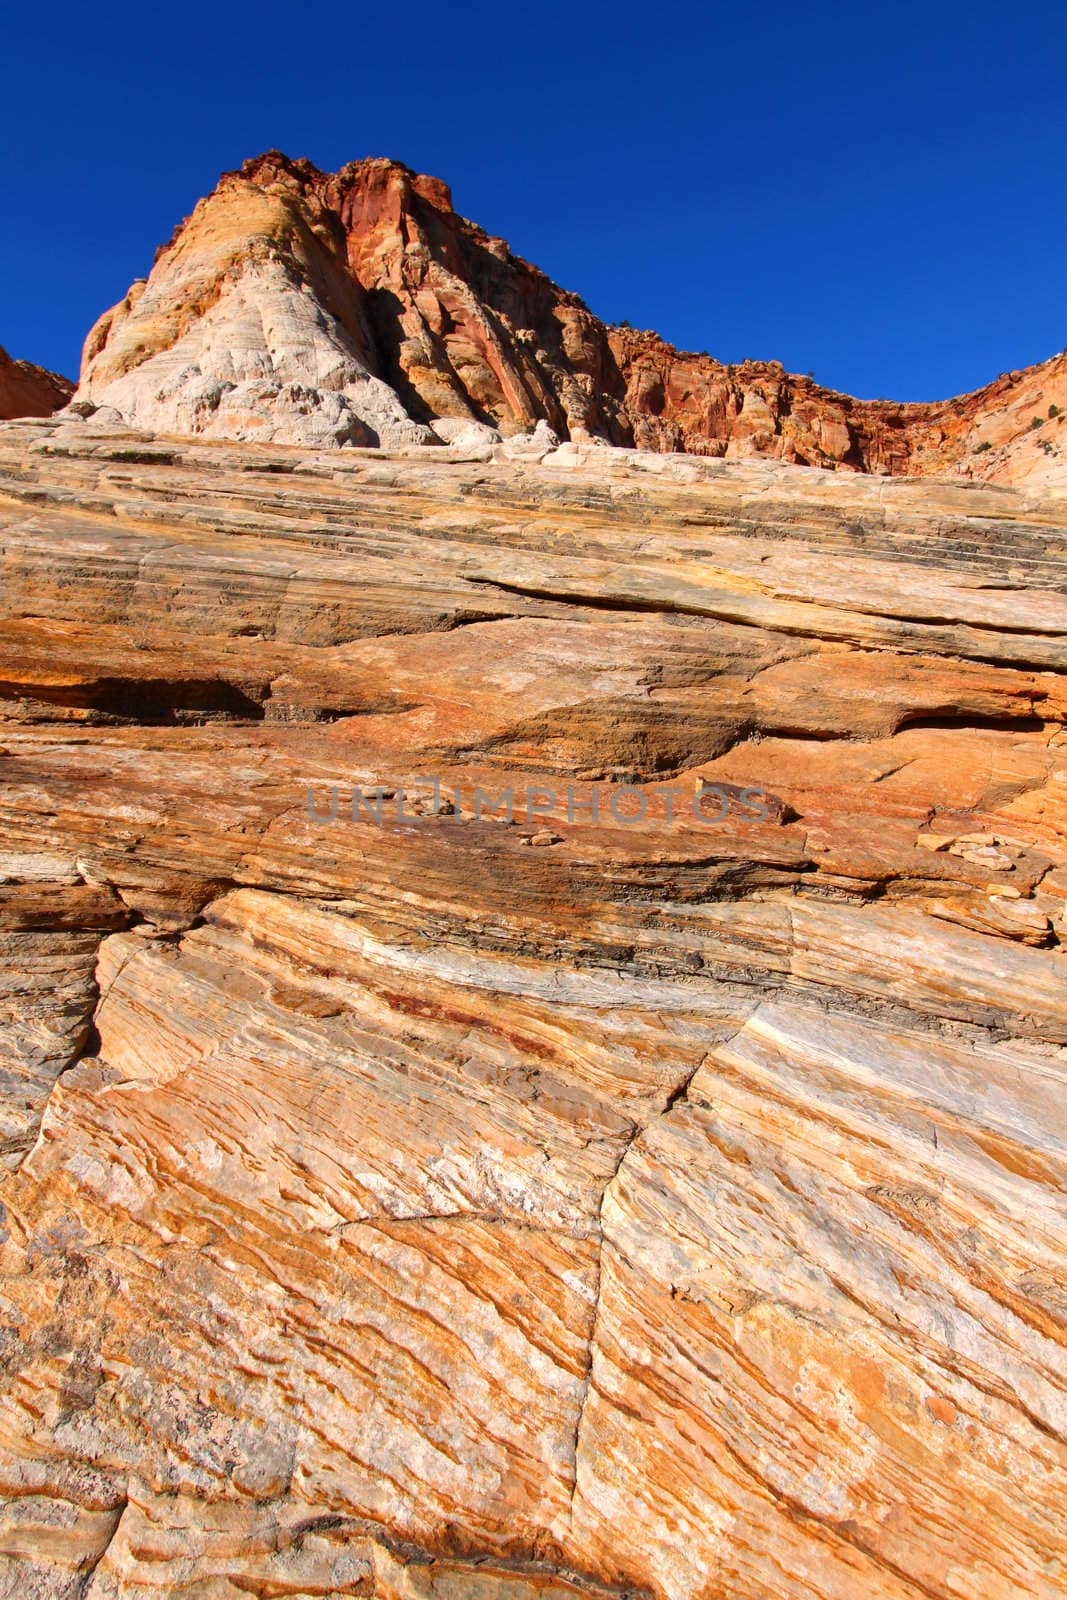 Steep topography and rocky surfaces at Capitol Reef National Park in Utah.